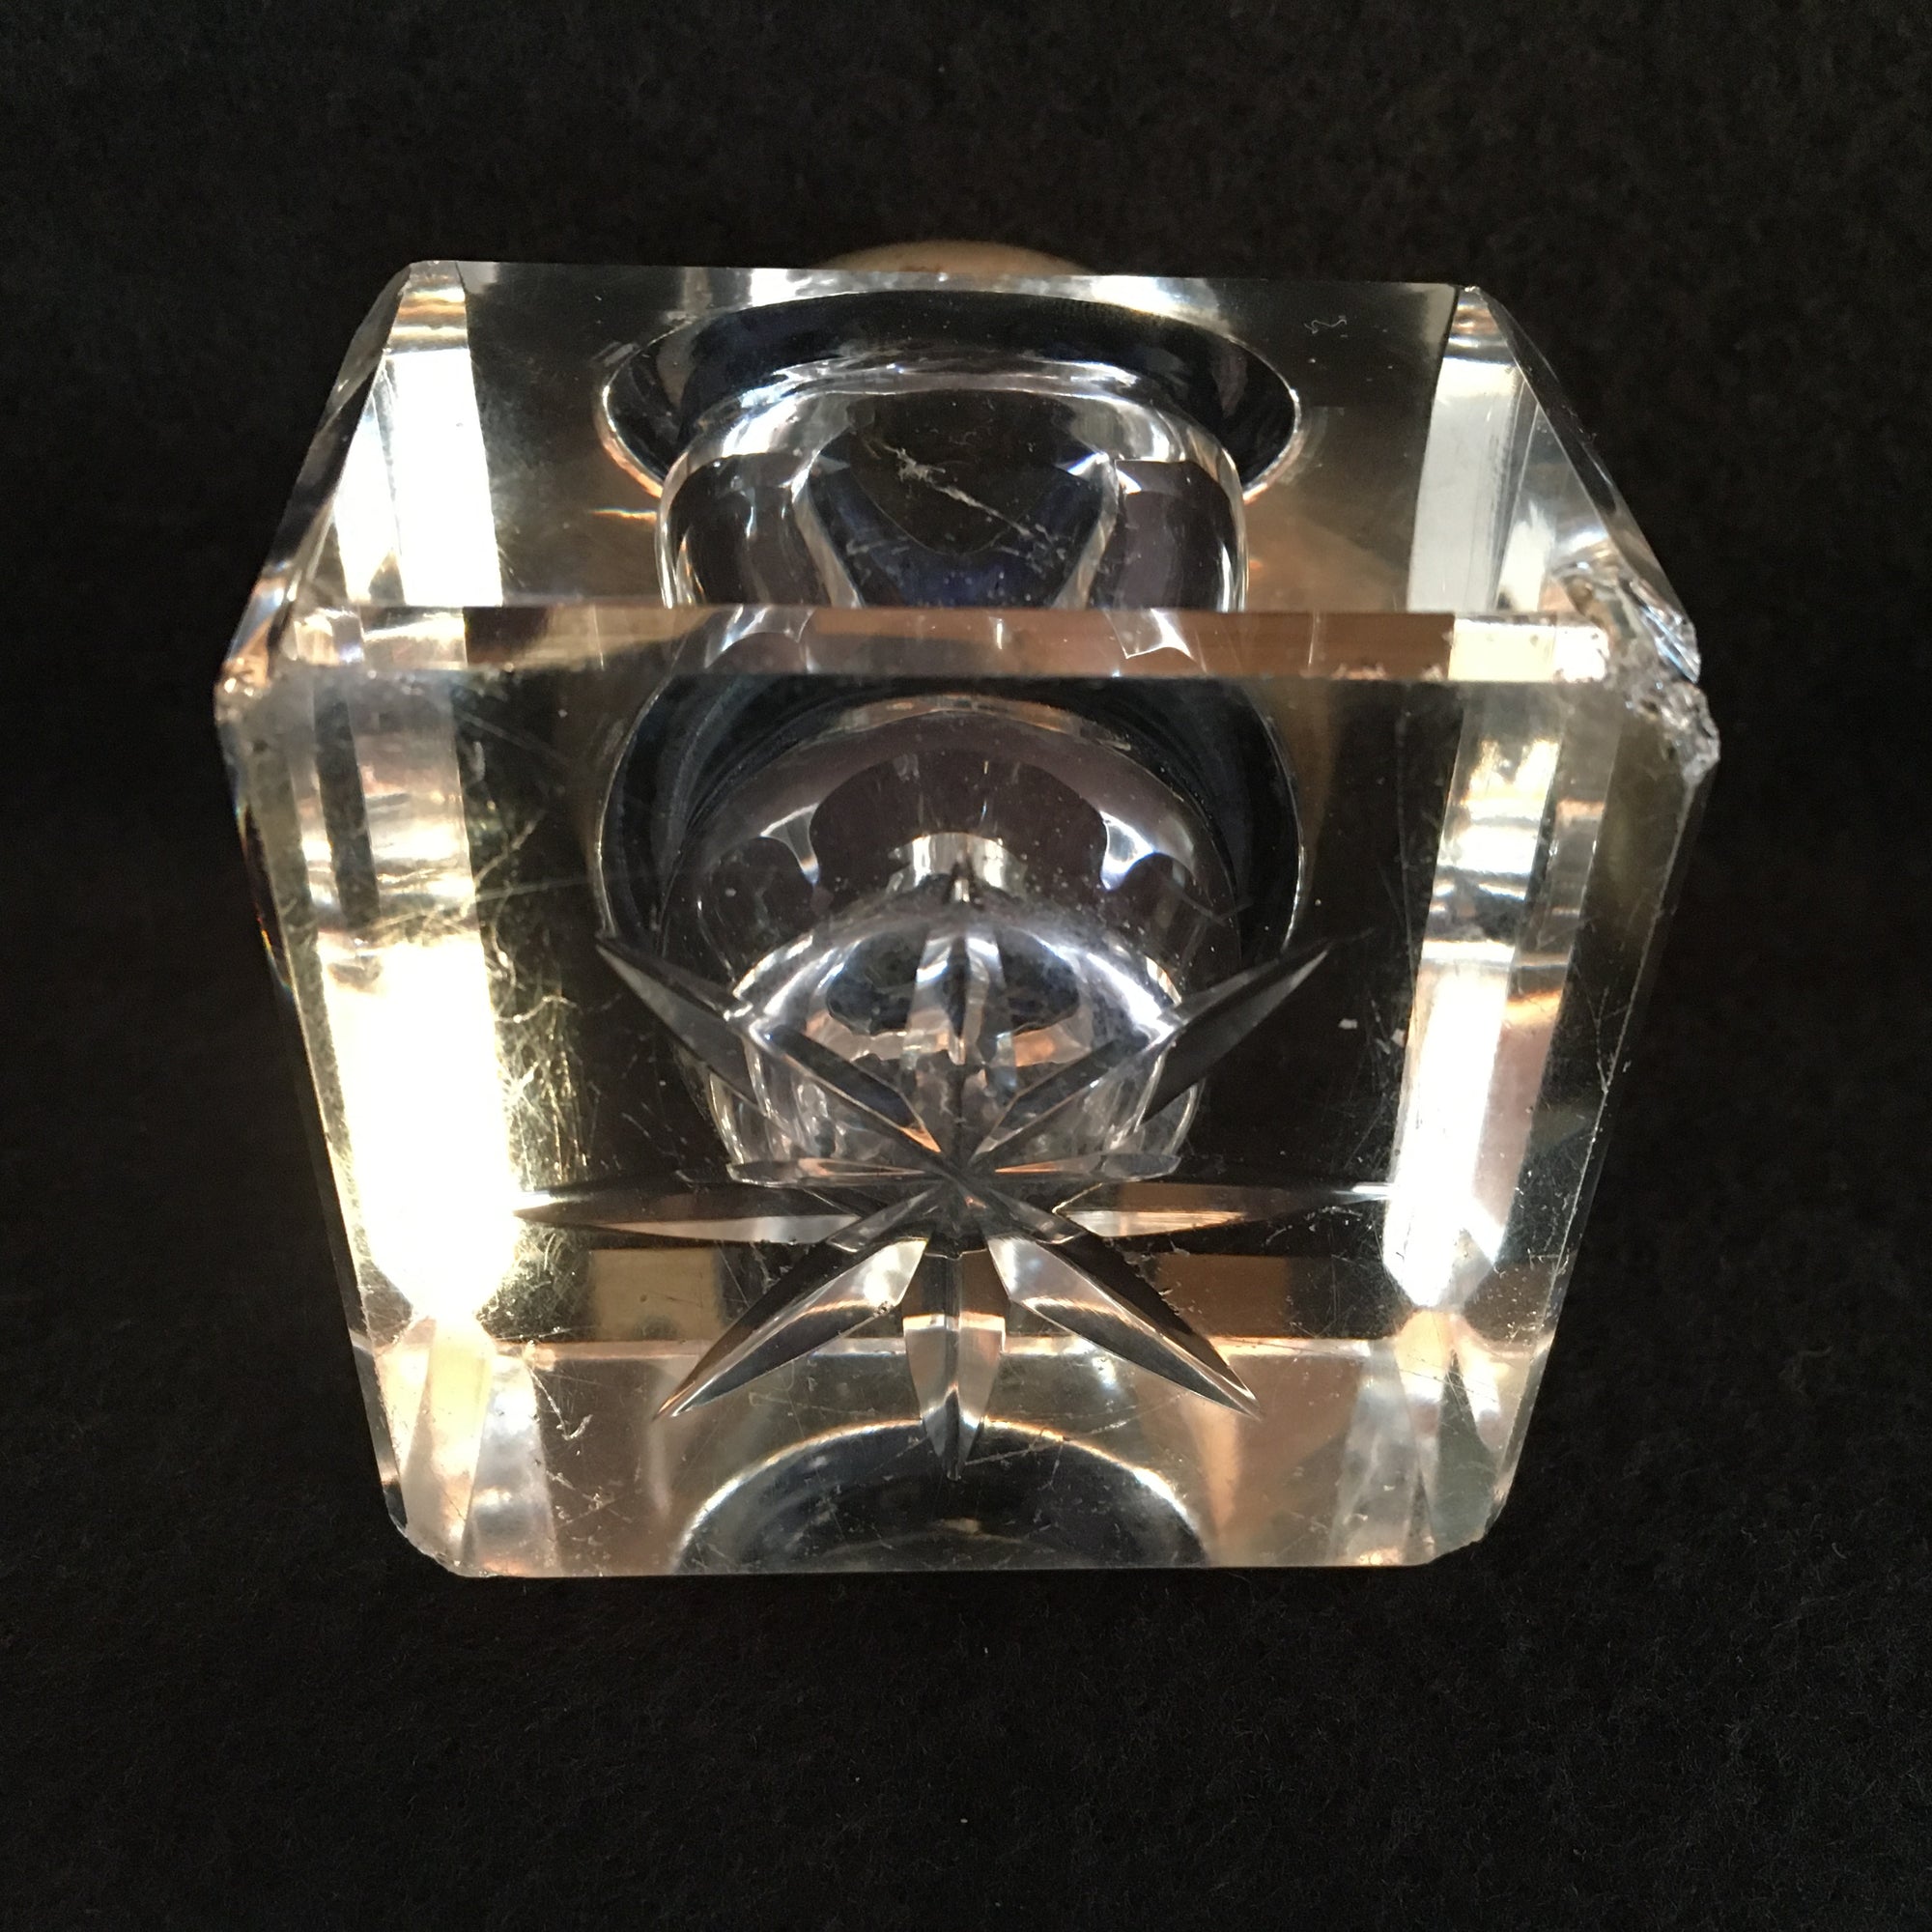 Victorian Era Sterling Silver and Cut-Glass Inkwell